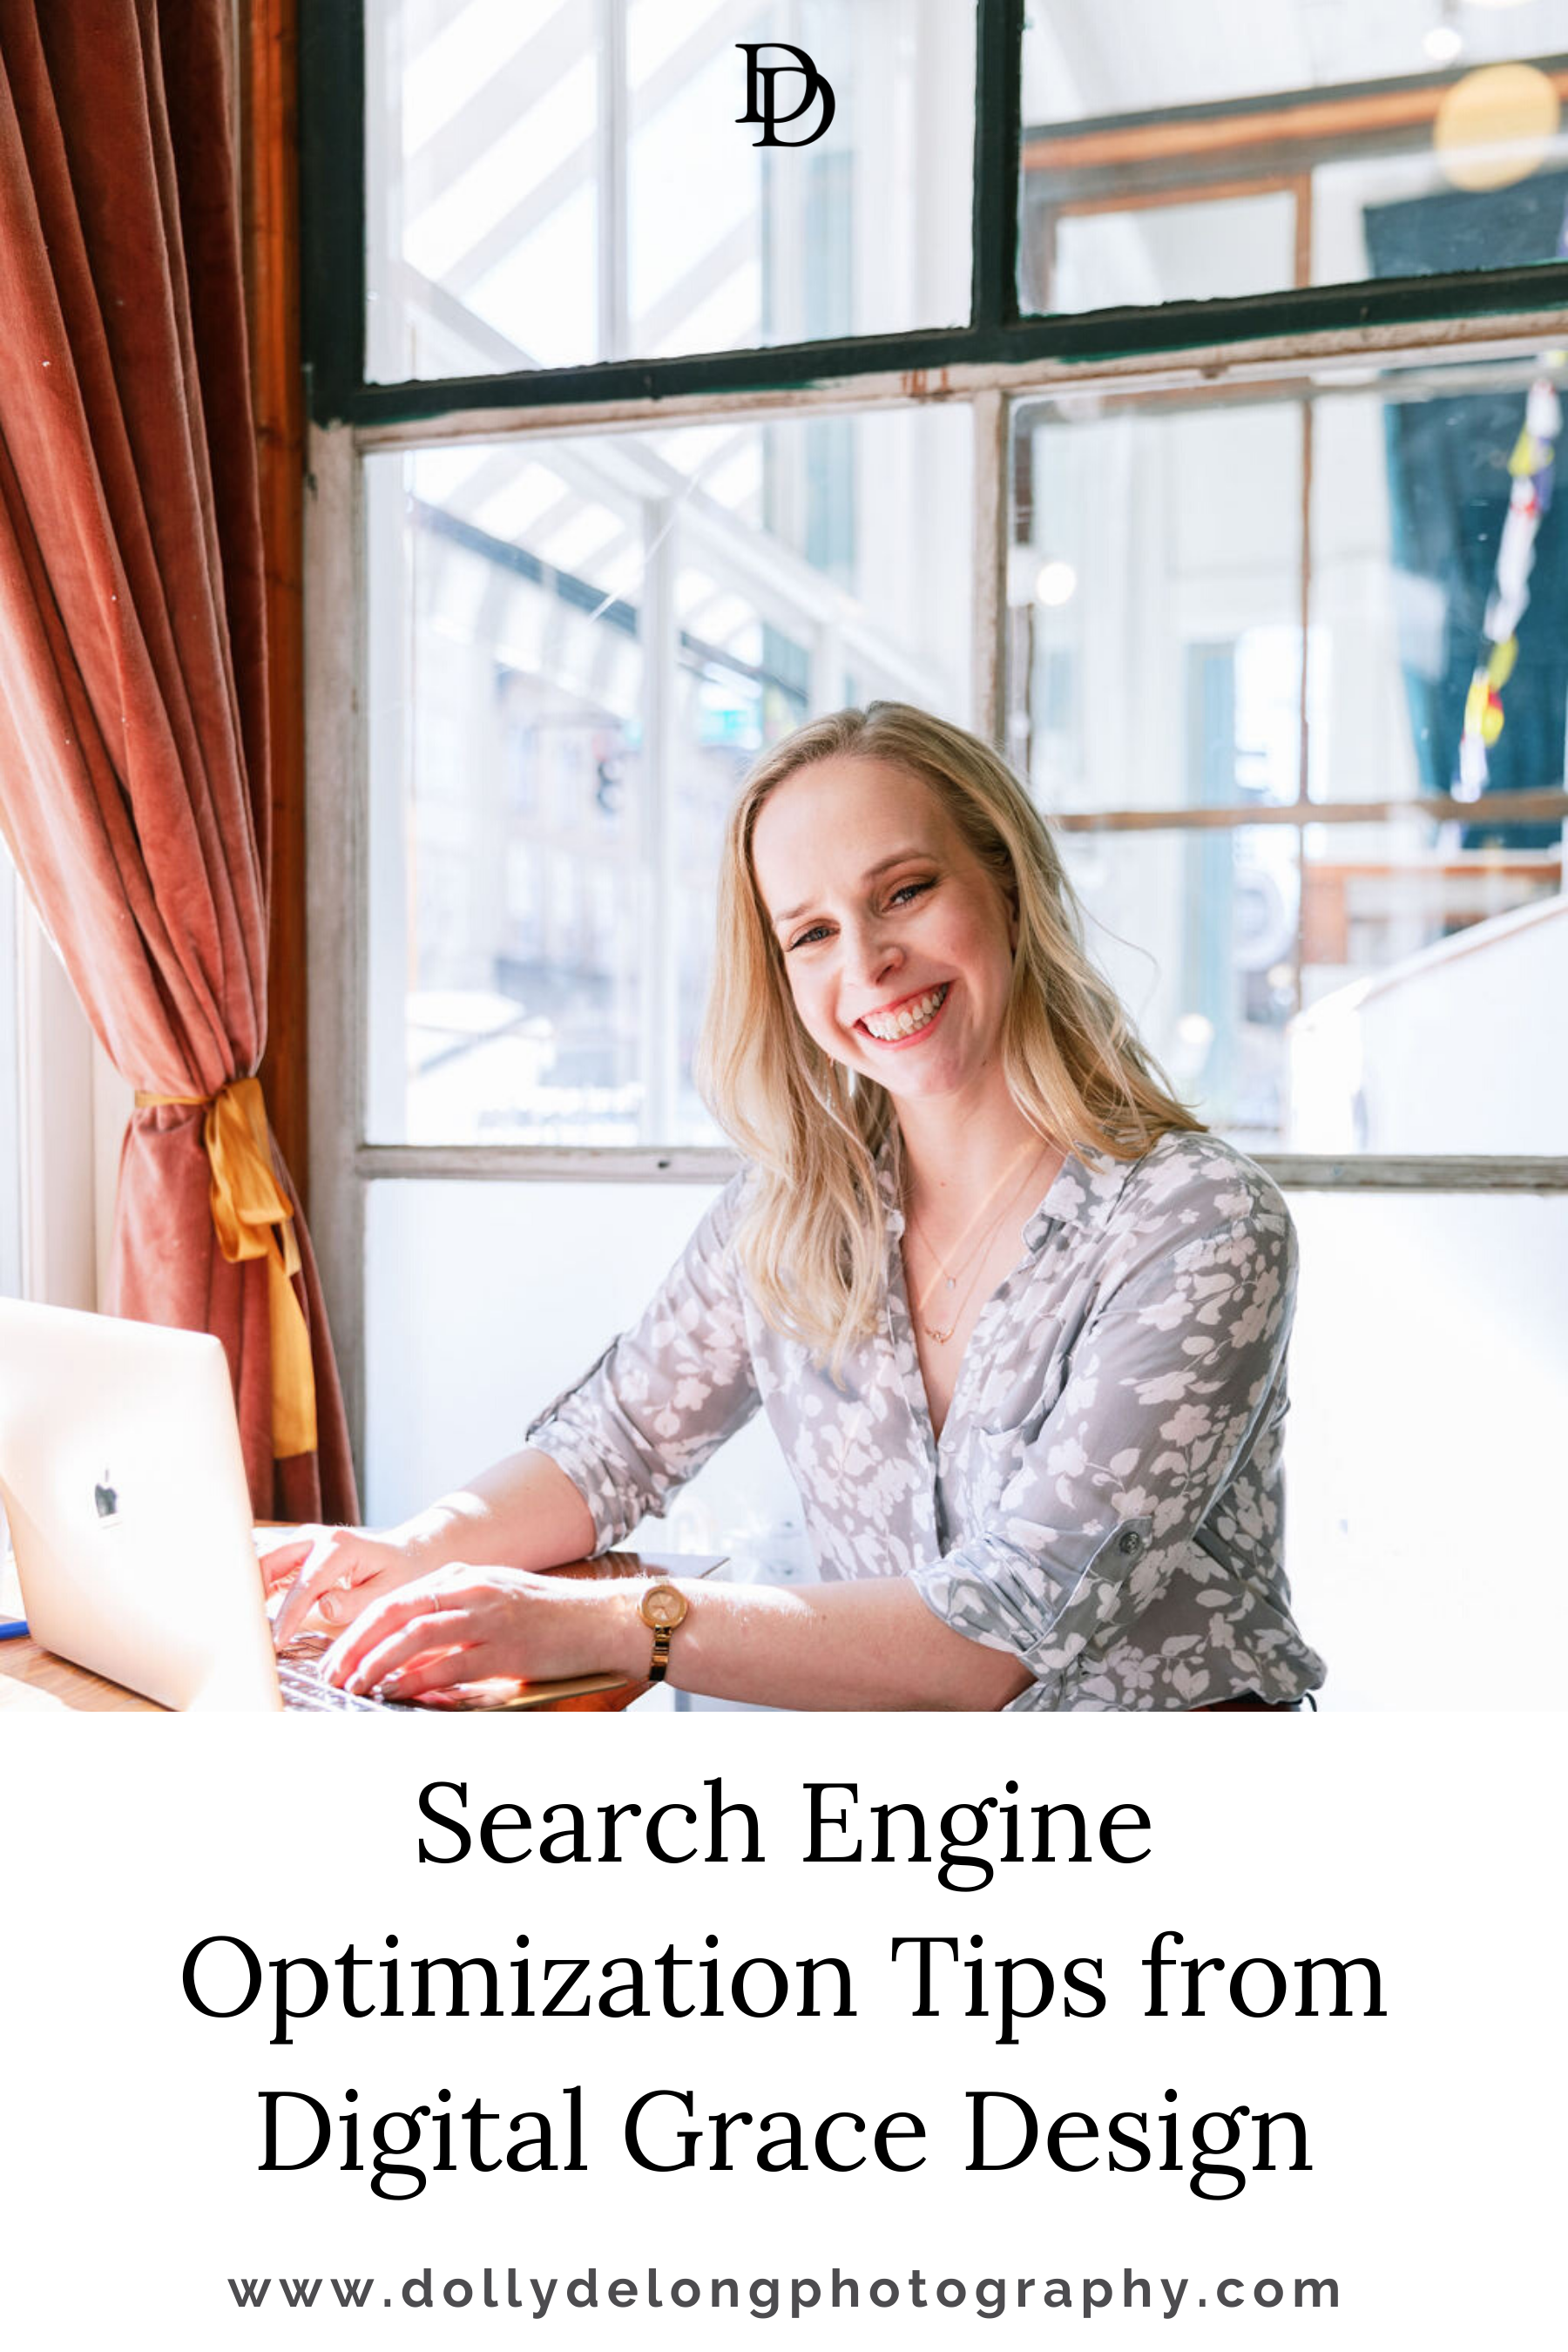 Search Engine Optimization Tips with Digital Grace Design as featured by Nashville Branding Photographer Dolly DeLong Photography